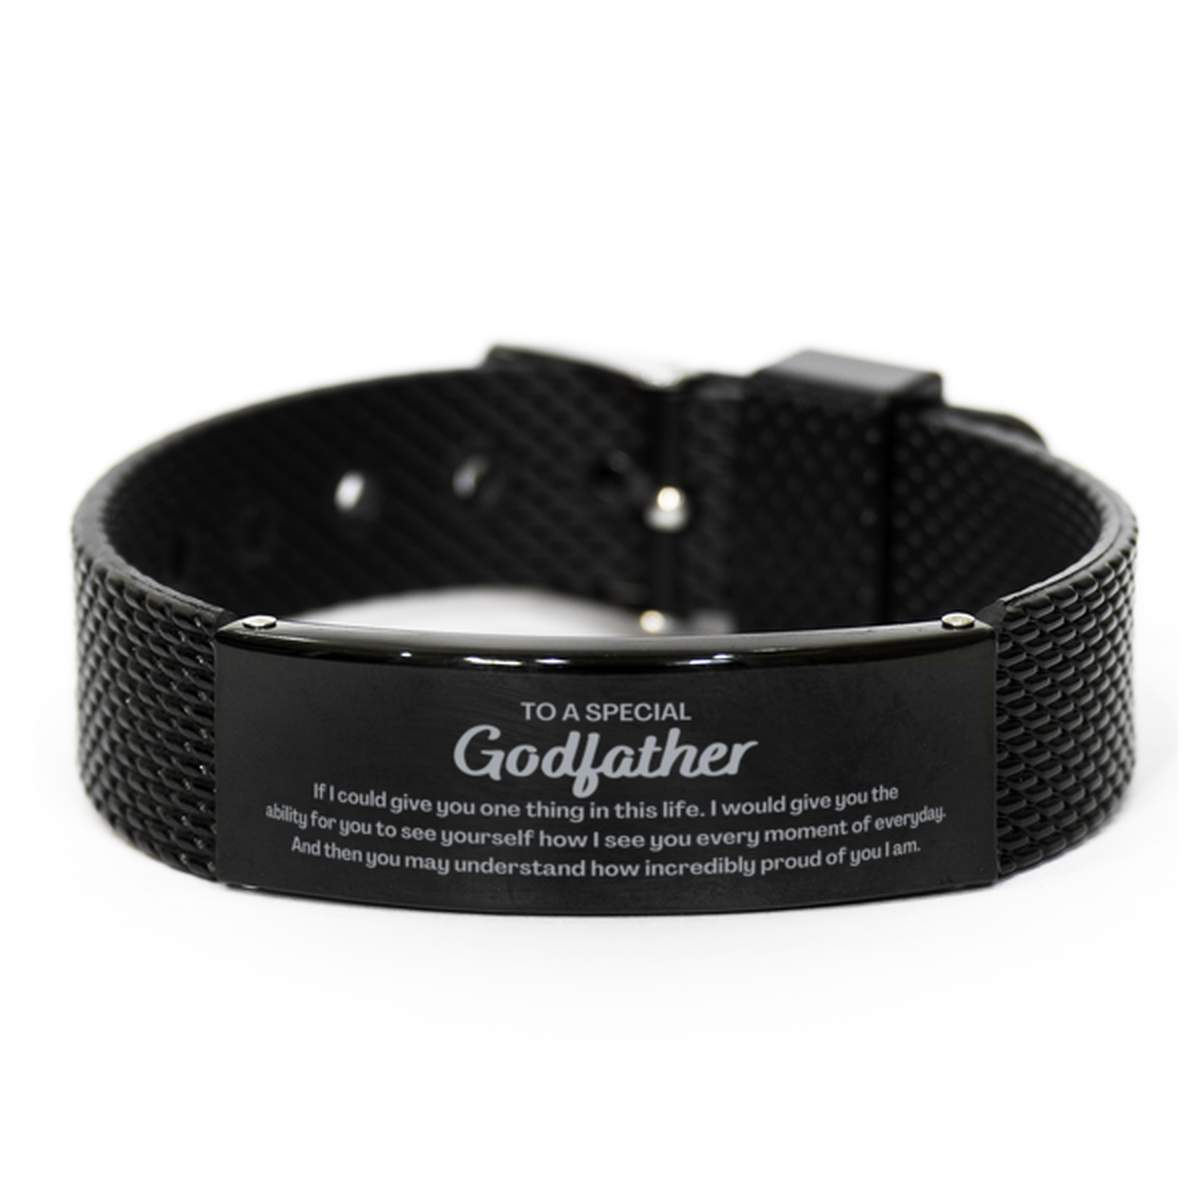 To My Godfather Black Shark Mesh Bracelet, Gifts For Godfather Engraved, Inspirational Gifts for Christmas Birthday, Epic Gifts for Godfather To A Special Godfather how incredibly proud of you I am